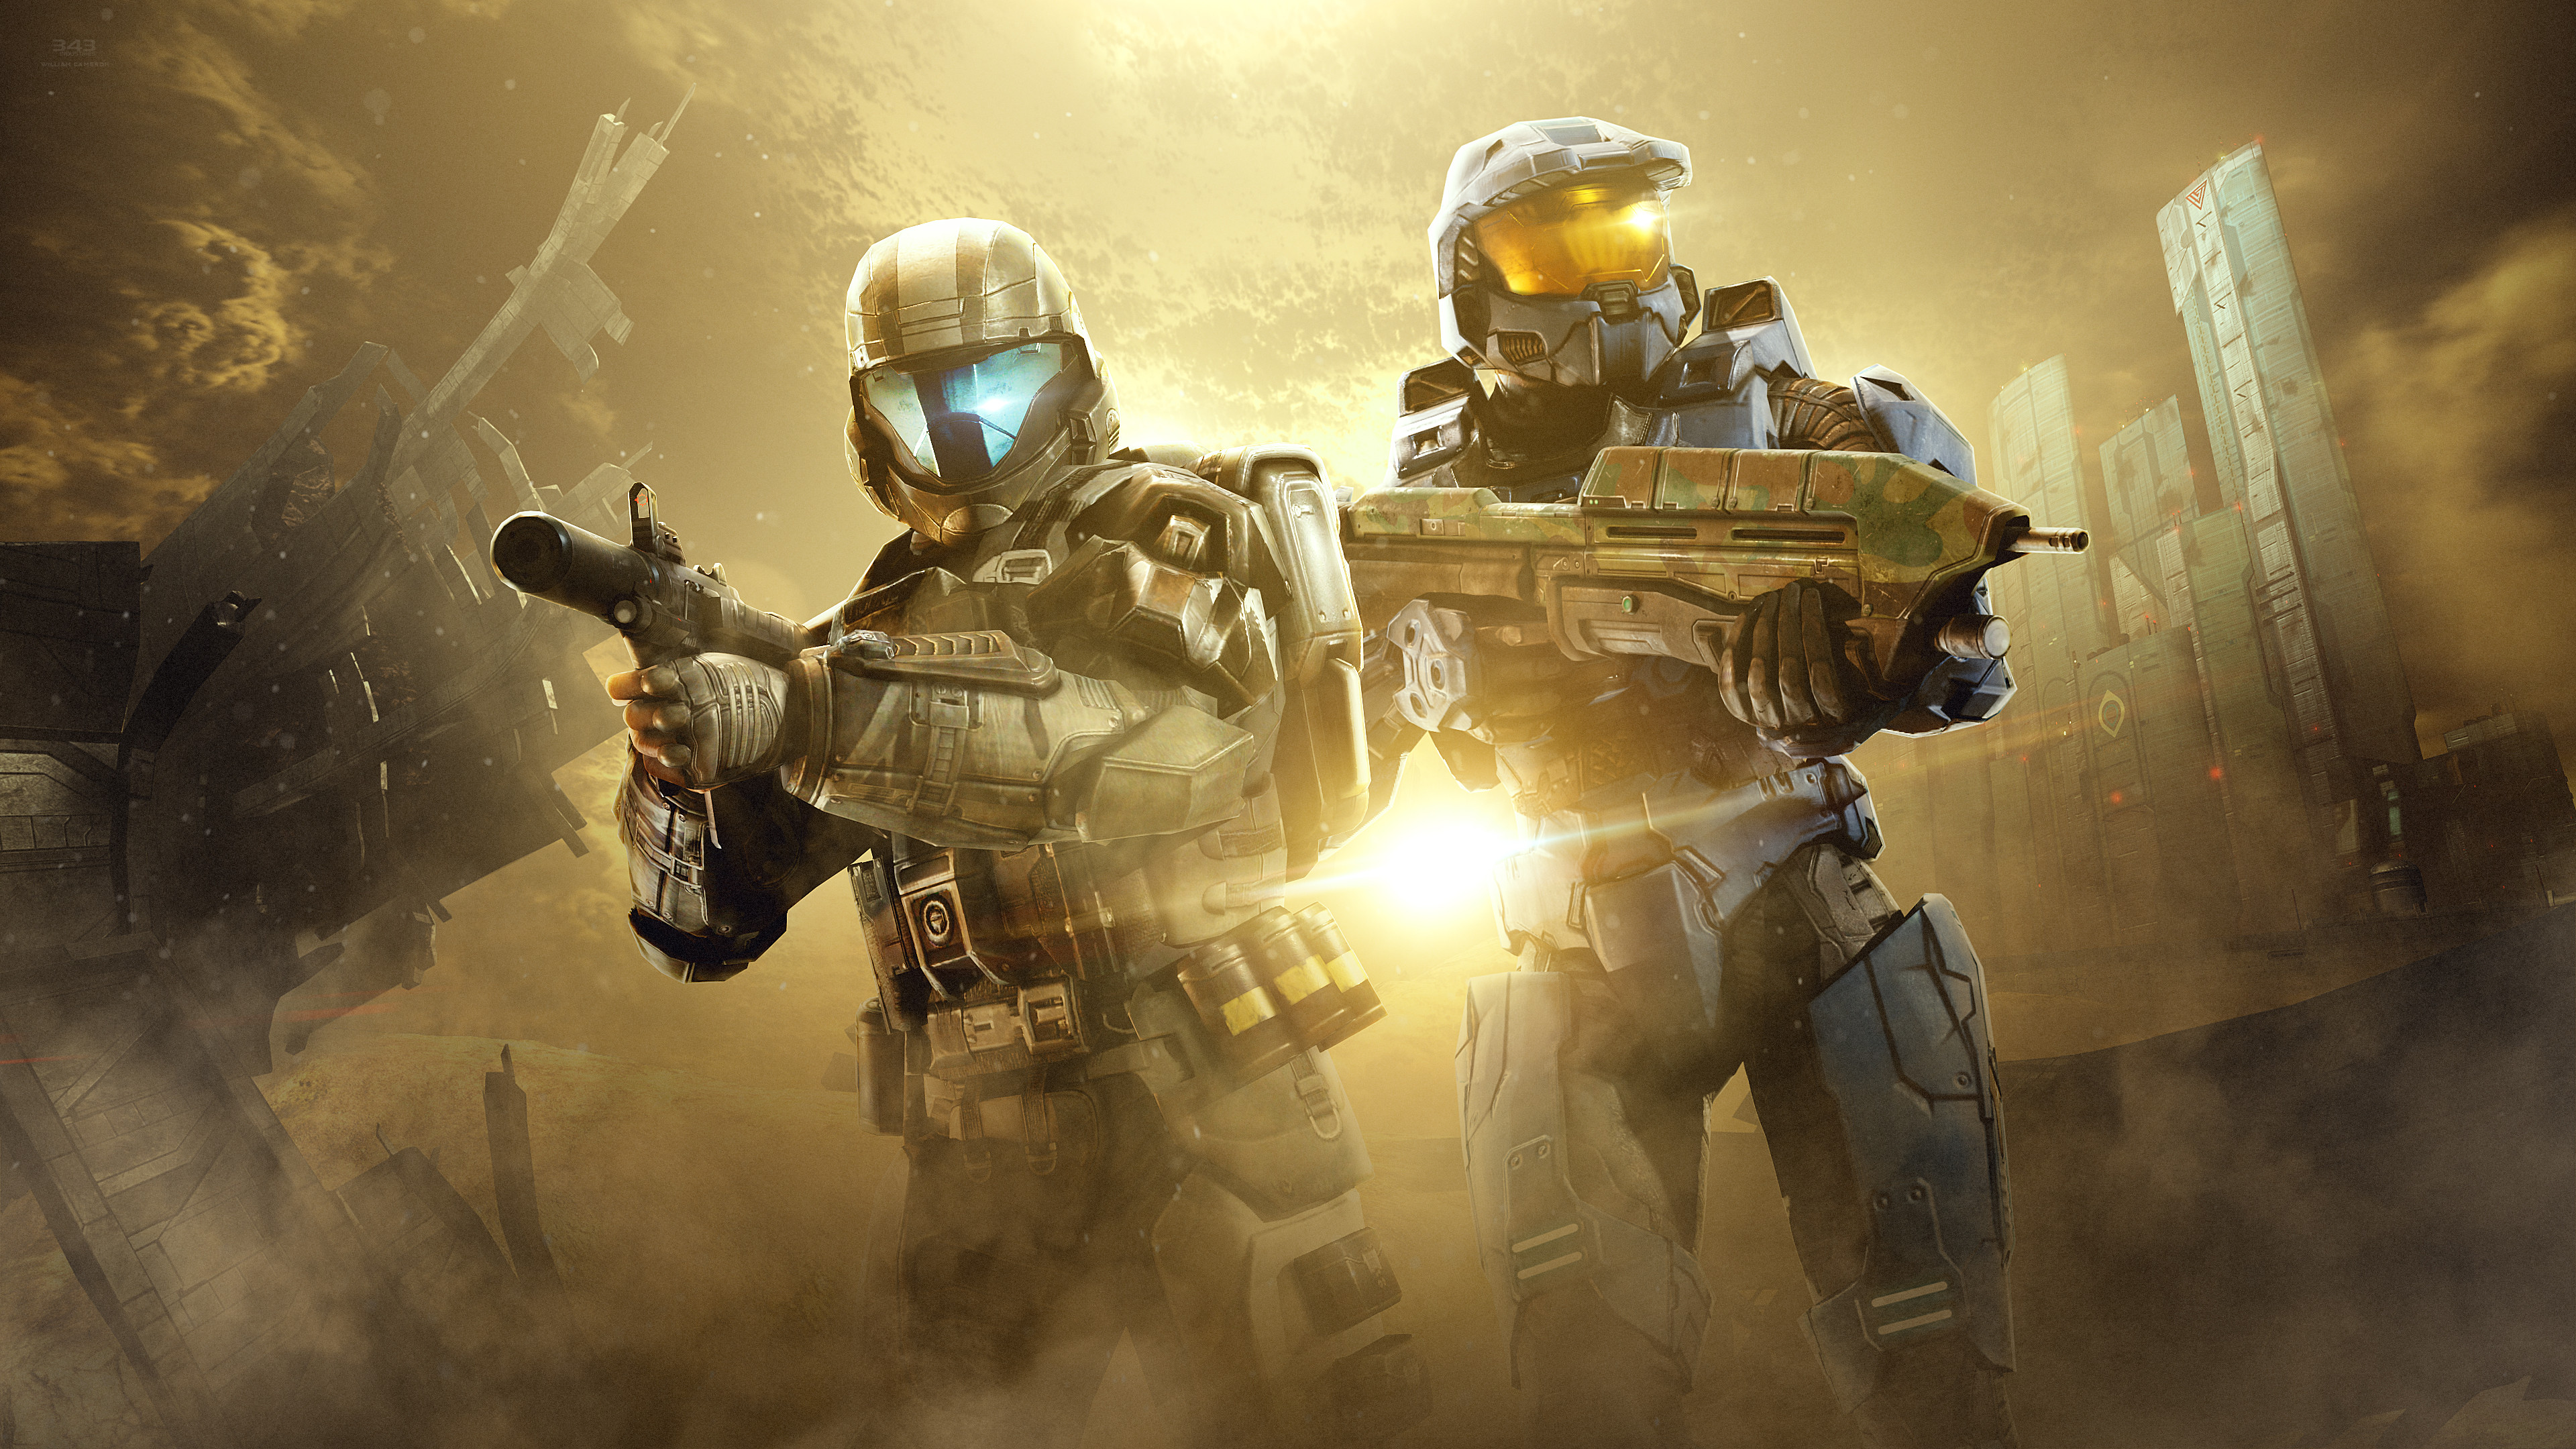 Halo Video Games Video Game Art Soldier Artwork Weapon Science Fiction 3840x2160